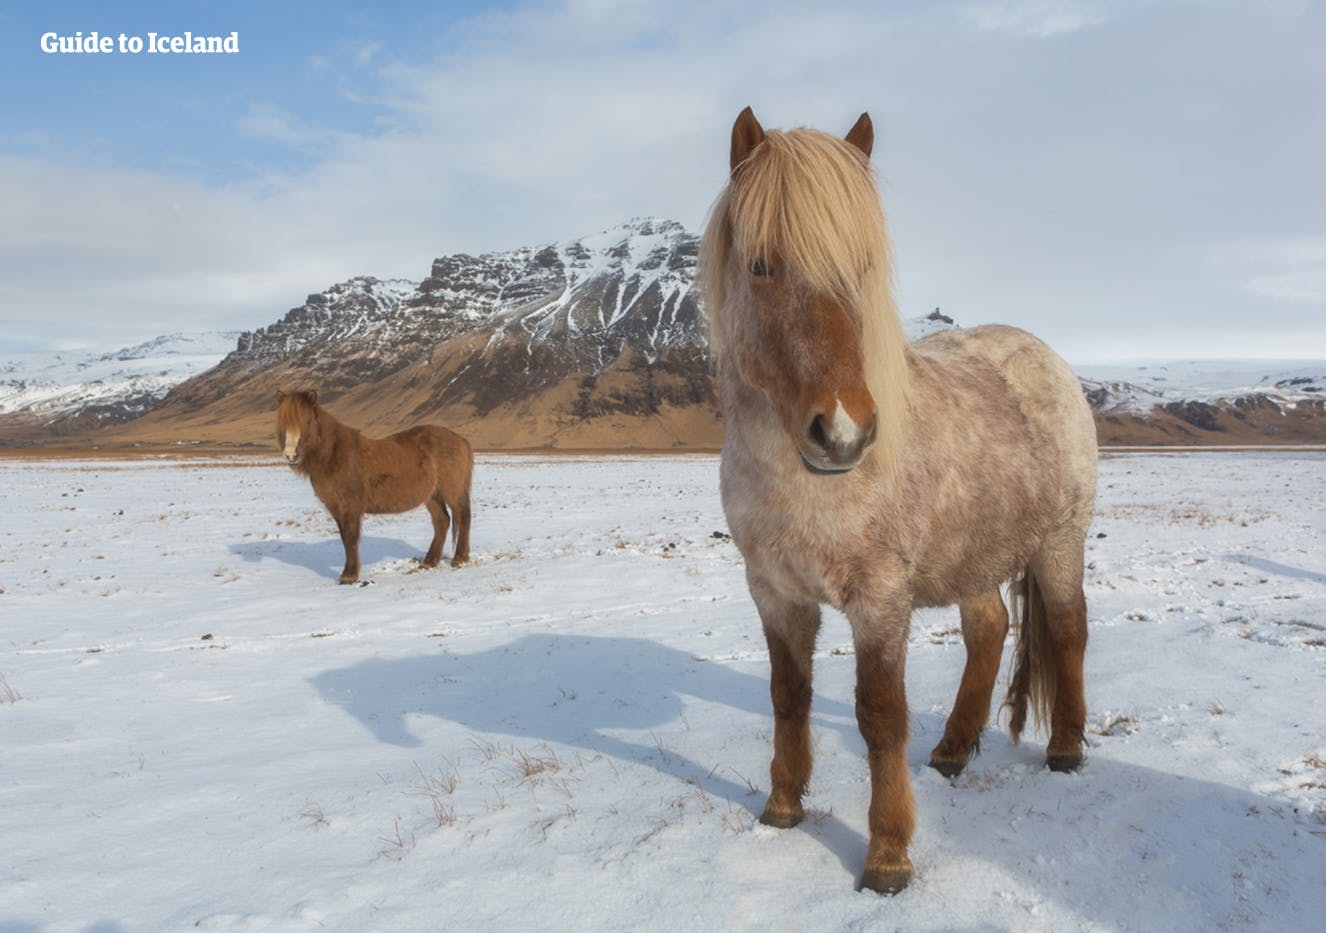 During winter time, the Icelandic horse grows a thick coat to protect itself from the cold.